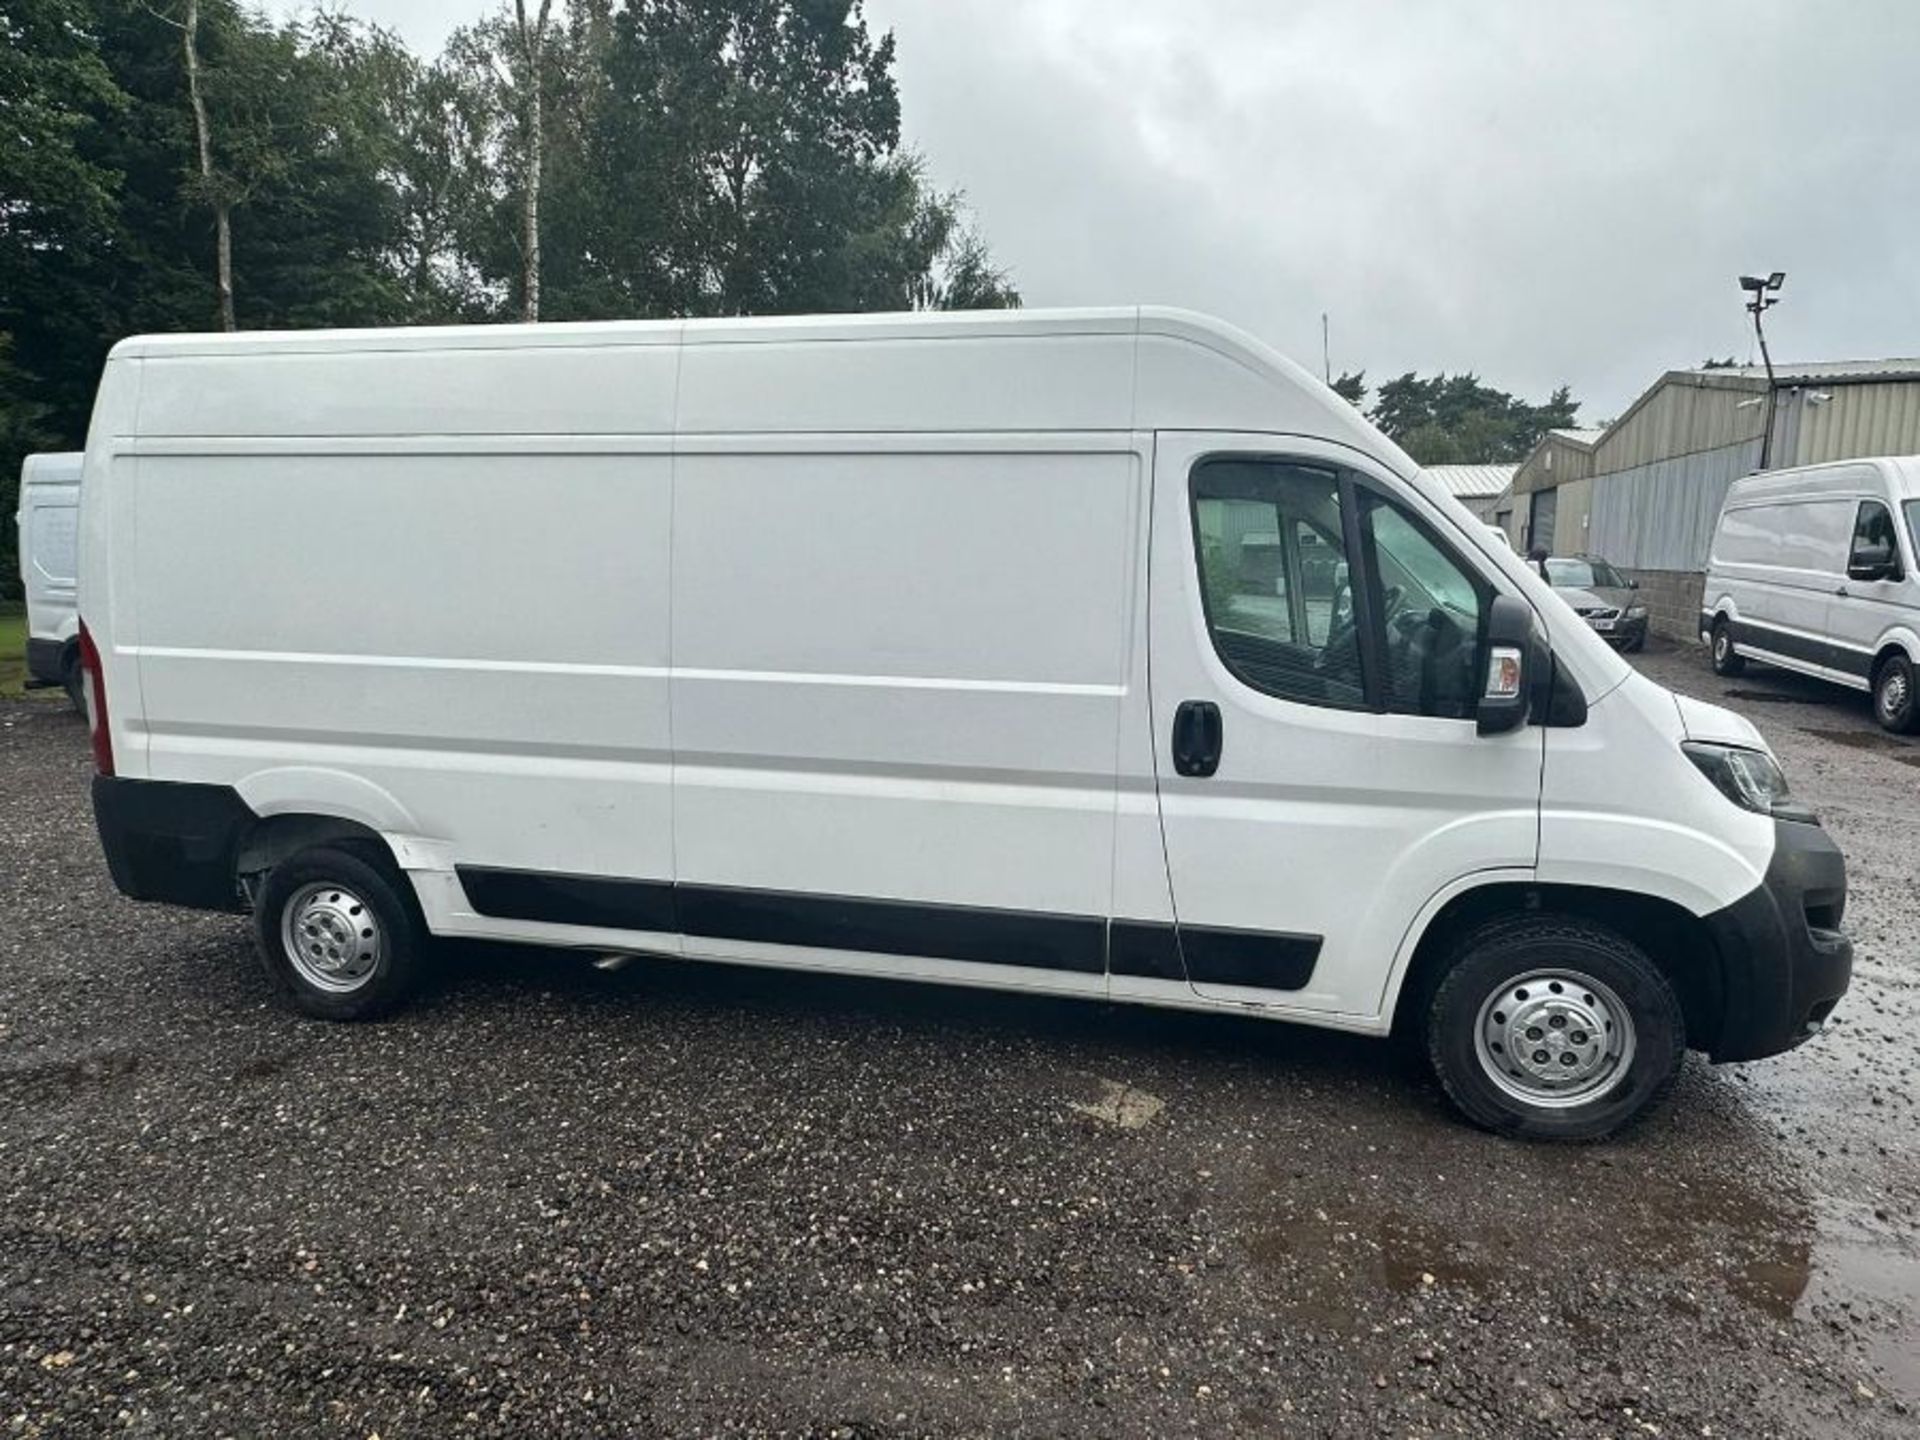 2021 21 PEUGEOT BOXER PROFESSIONAL PANEL VAN - 34K MILE - AIR CON - PLY LINED. - Image 7 of 7